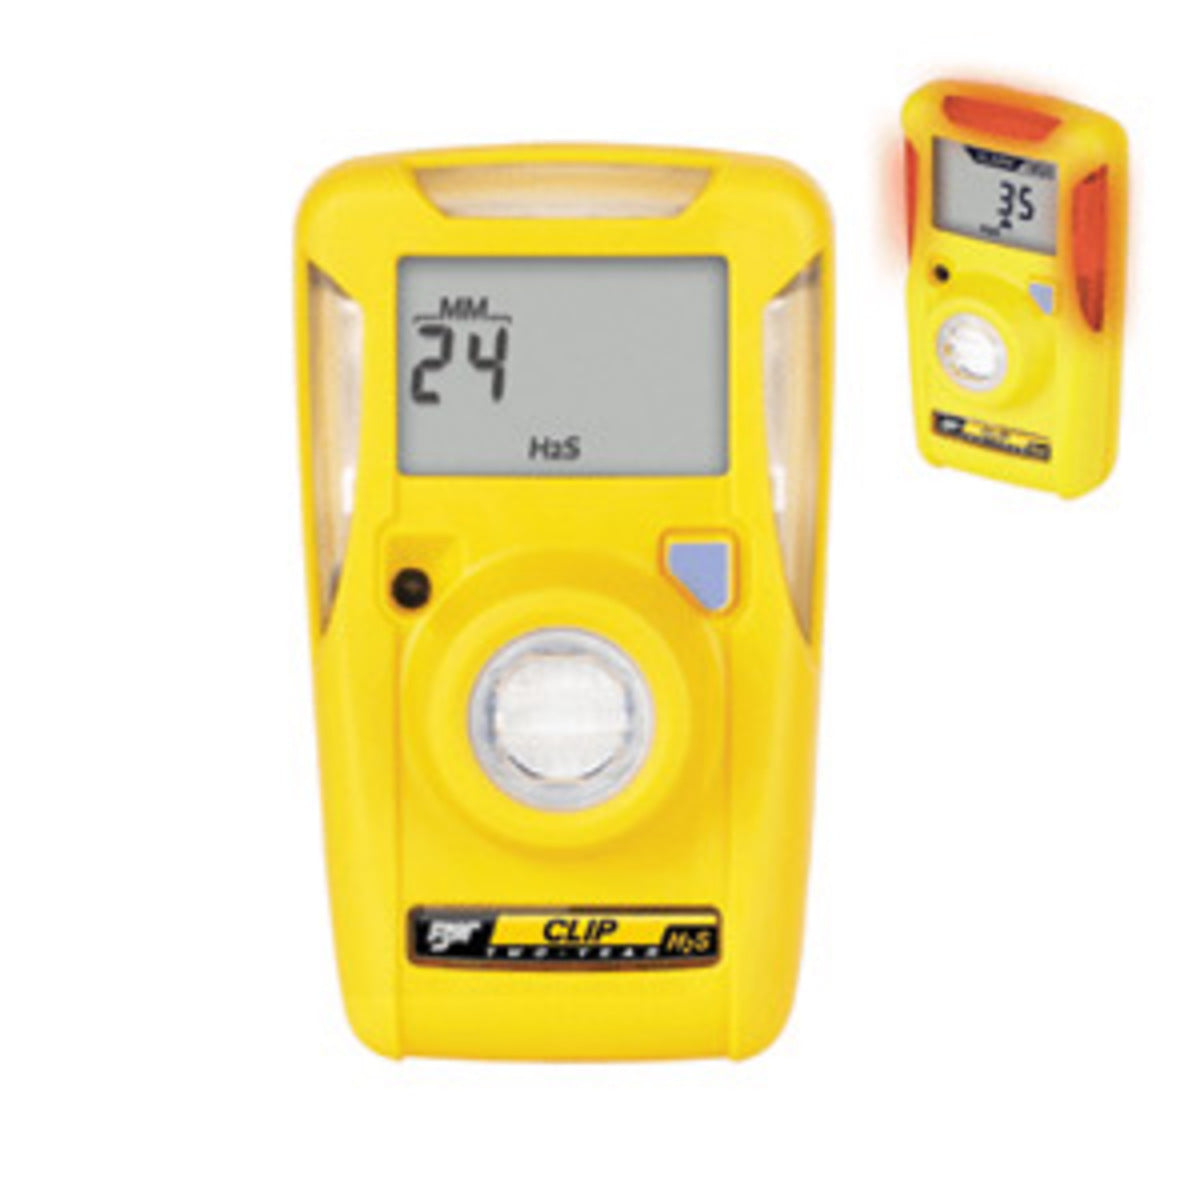 BW Technologies by Honeywell BW Clip™ Portable Hydrogen Sulfide Gas Monitor-eSafety Supplies, Inc